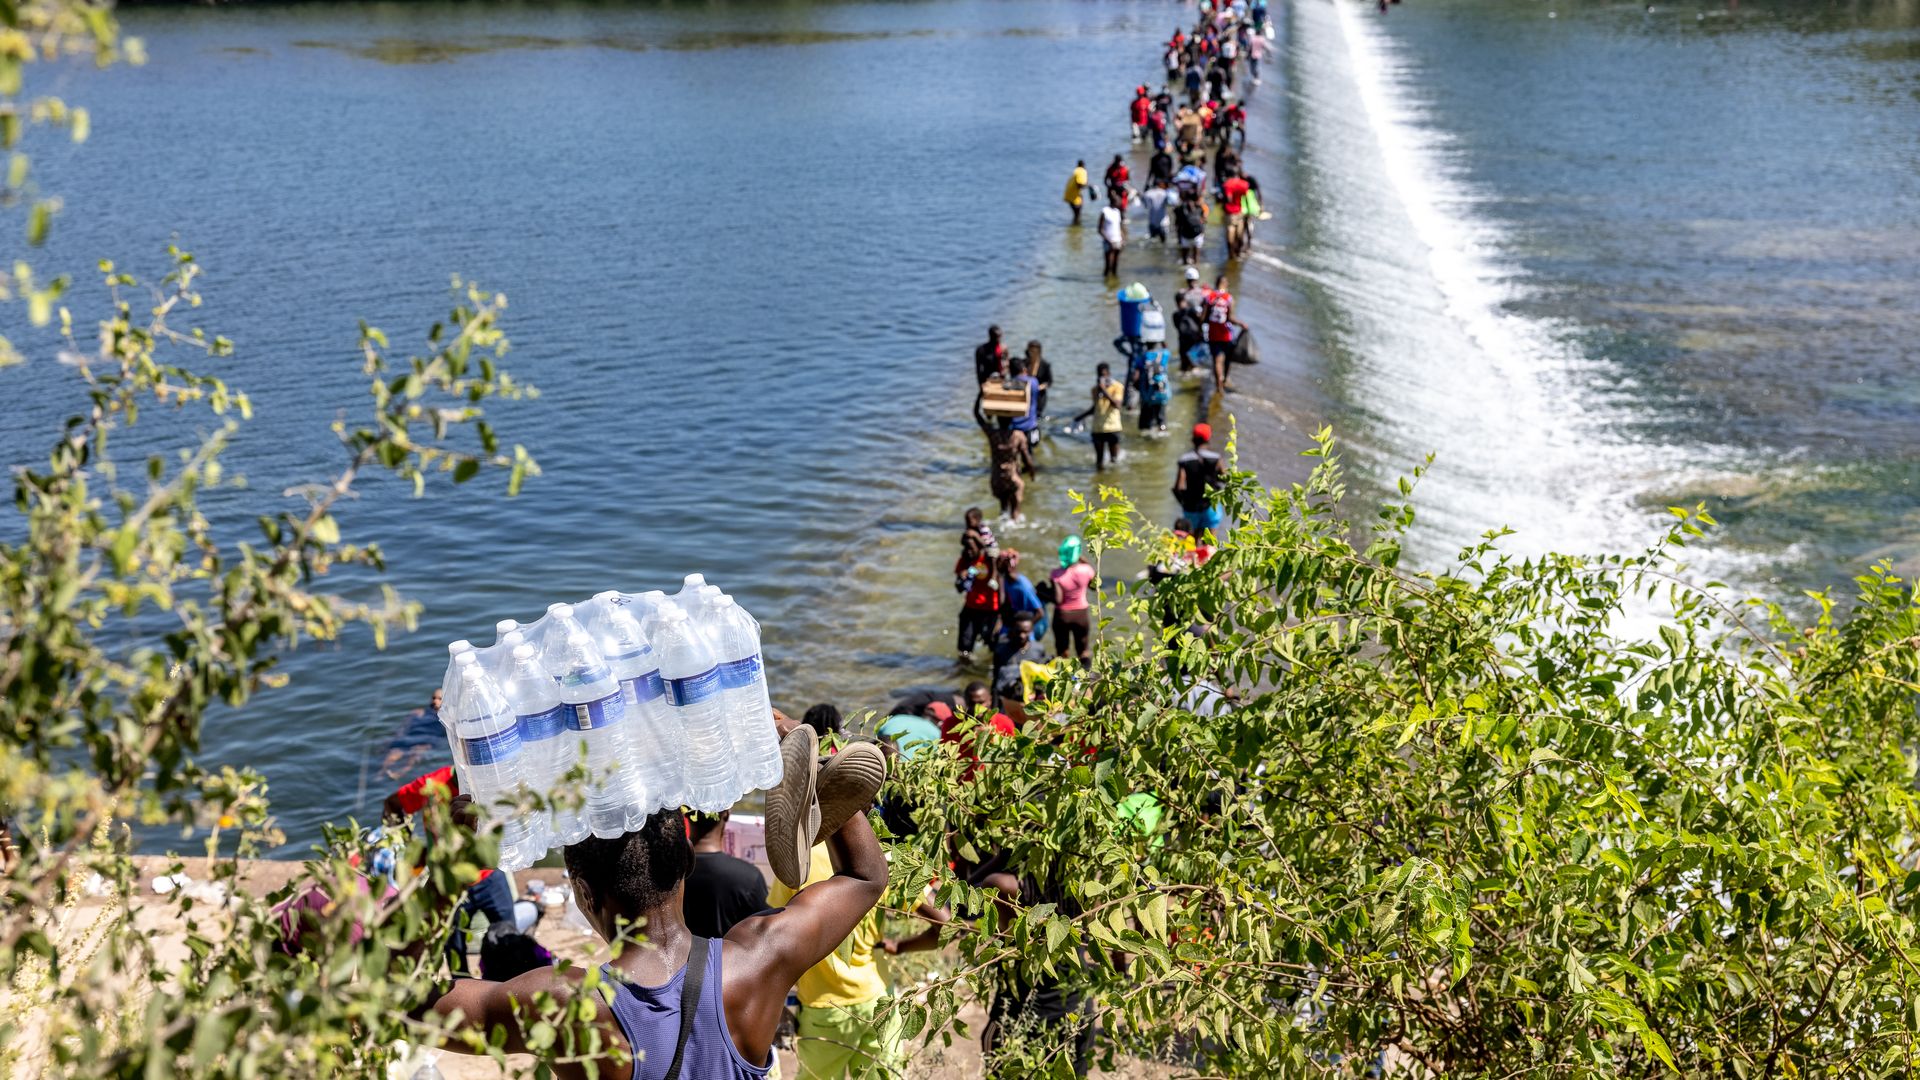 Photo of a stream of people walking across the Rio Grande River carrying belongings and water